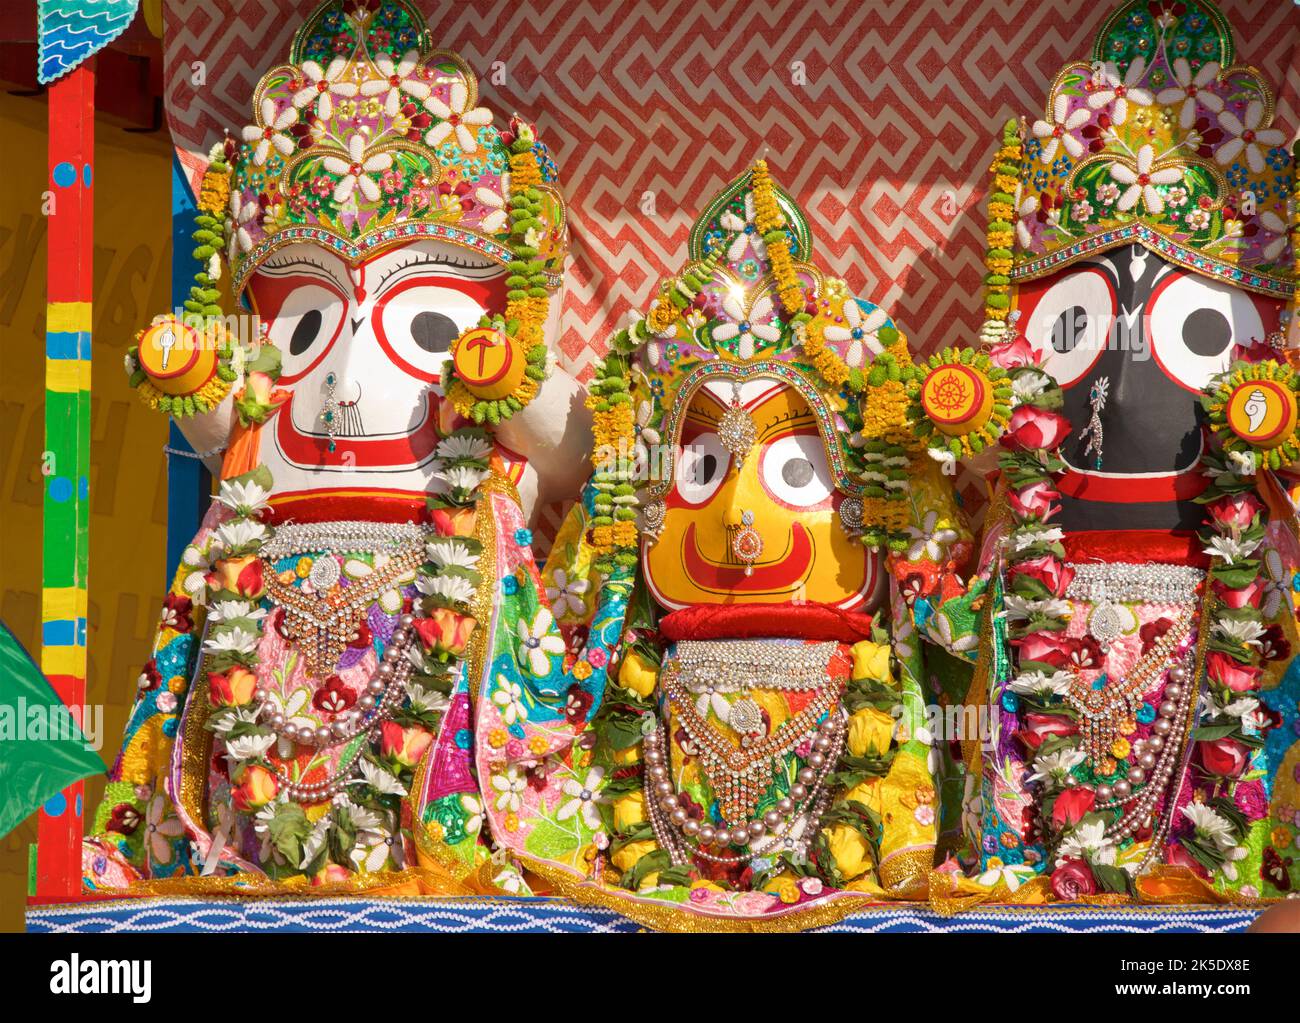 Detail of the Hare Krishna procession juggernaut, with deities adorned. The annual Rathayatra Festival for Lord Krishna and his devotees promenades along Hove esplanade each year. Krishna in his form of Jagannatha is pulled along on a large wooden juggernaut. Stock Photo